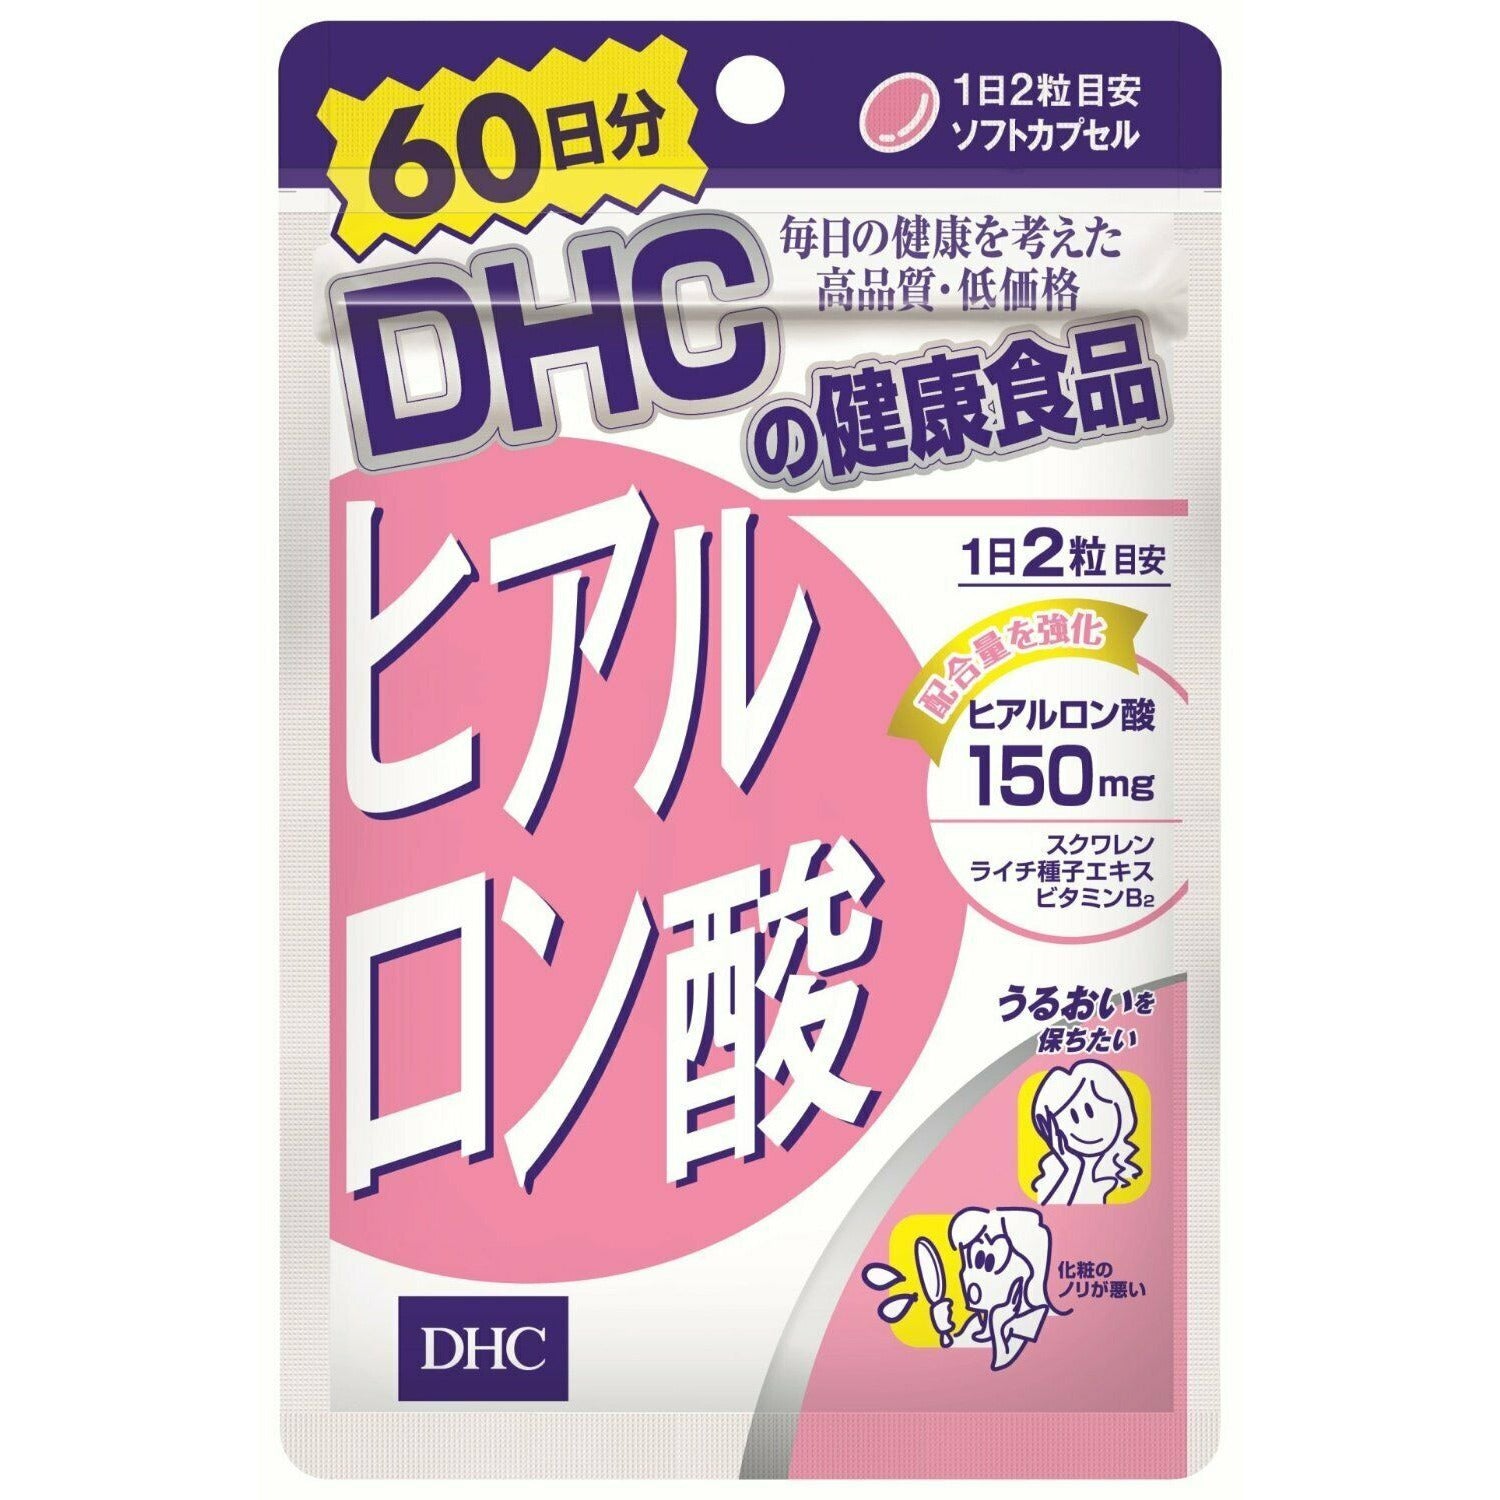 DHC supplements hyaluronic acid 60 days 120 tablets Japan Free Shipping